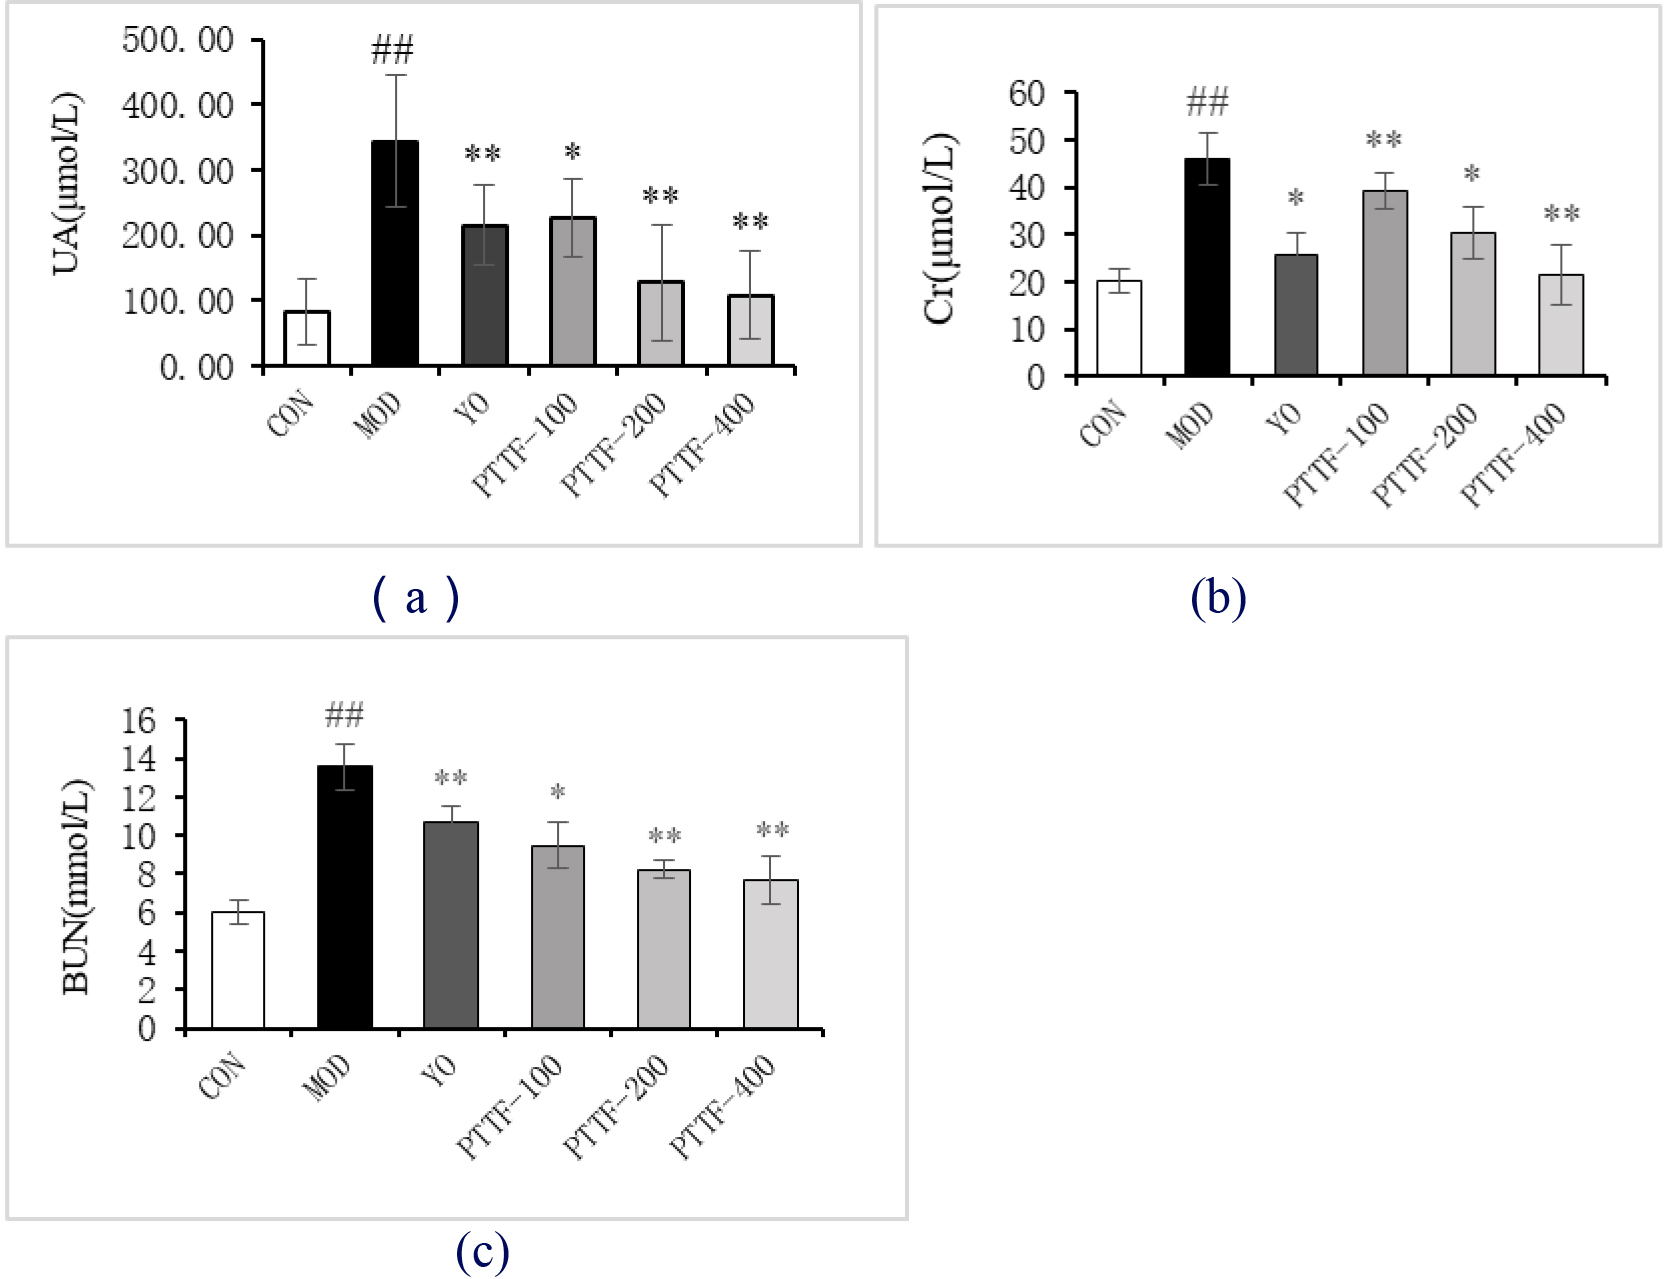 Effects of PTTF on serum UA, Cr, and BUN levels in hyperuricemic rats. Note: CON: Blank group; MOD: Model group; YO: Benzbromarone group; PTTF-100: Prunus Tomentosa Total Flavones 100 mg/kg-Dose group; PTTF-200: Prunus Tomentosa Total Flavones 200 mg/kg-Dose group; PTTF-400: Prunus Tomentosa Total Flavones 400 mg/kg-Dose group. Compared to the Blank group, #: P< 0.05; ##: P< 0.01. Compared to the Model group, *: P< 0.05; **: P< 0.01.